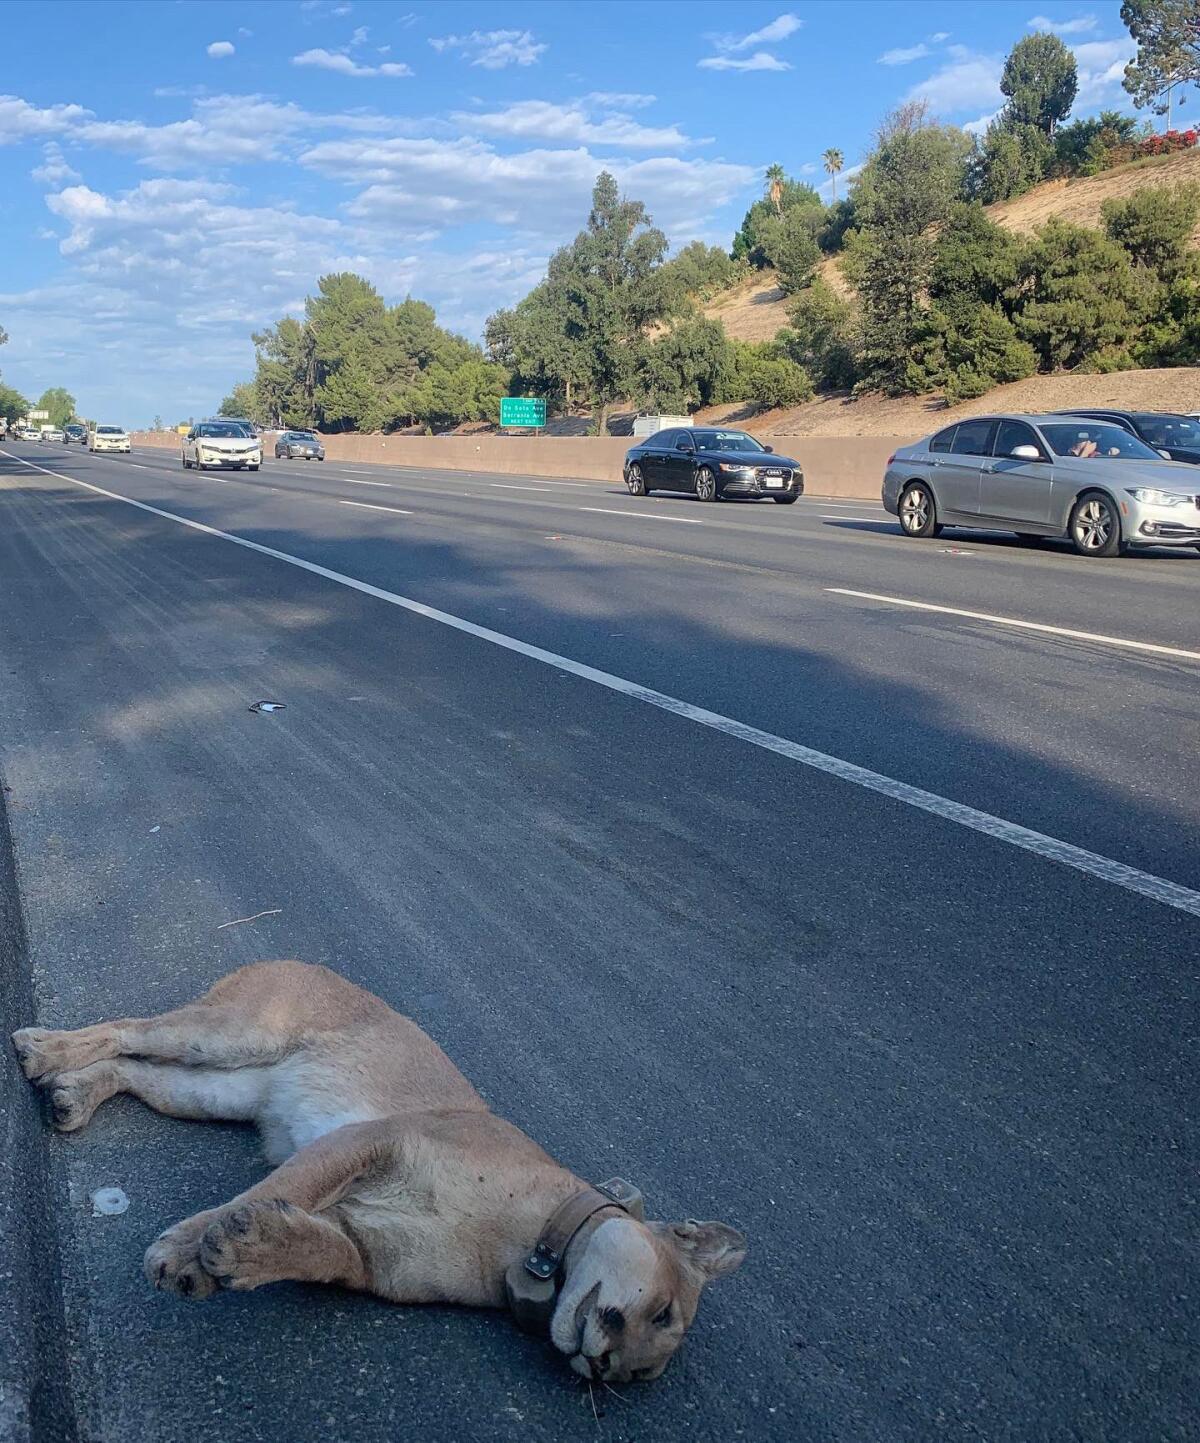 In this photo provided by the Santa Monica Mountains National Recreation Area, the mountain lion dubbed P-89, that was part of a National Park Service study, is seen after being fatally struck by a vehicle on a highway near Southern California's Santa Monica Mountains, Monday, July 18, 2022. The two-year-old male cougar was found along U.S. 101 in the Woodland Hills area of Los Angeles, the Santa Monica Mountains National Recreation Area said in a statement. (Santa Monica Mountains National Recreation Area via AP)